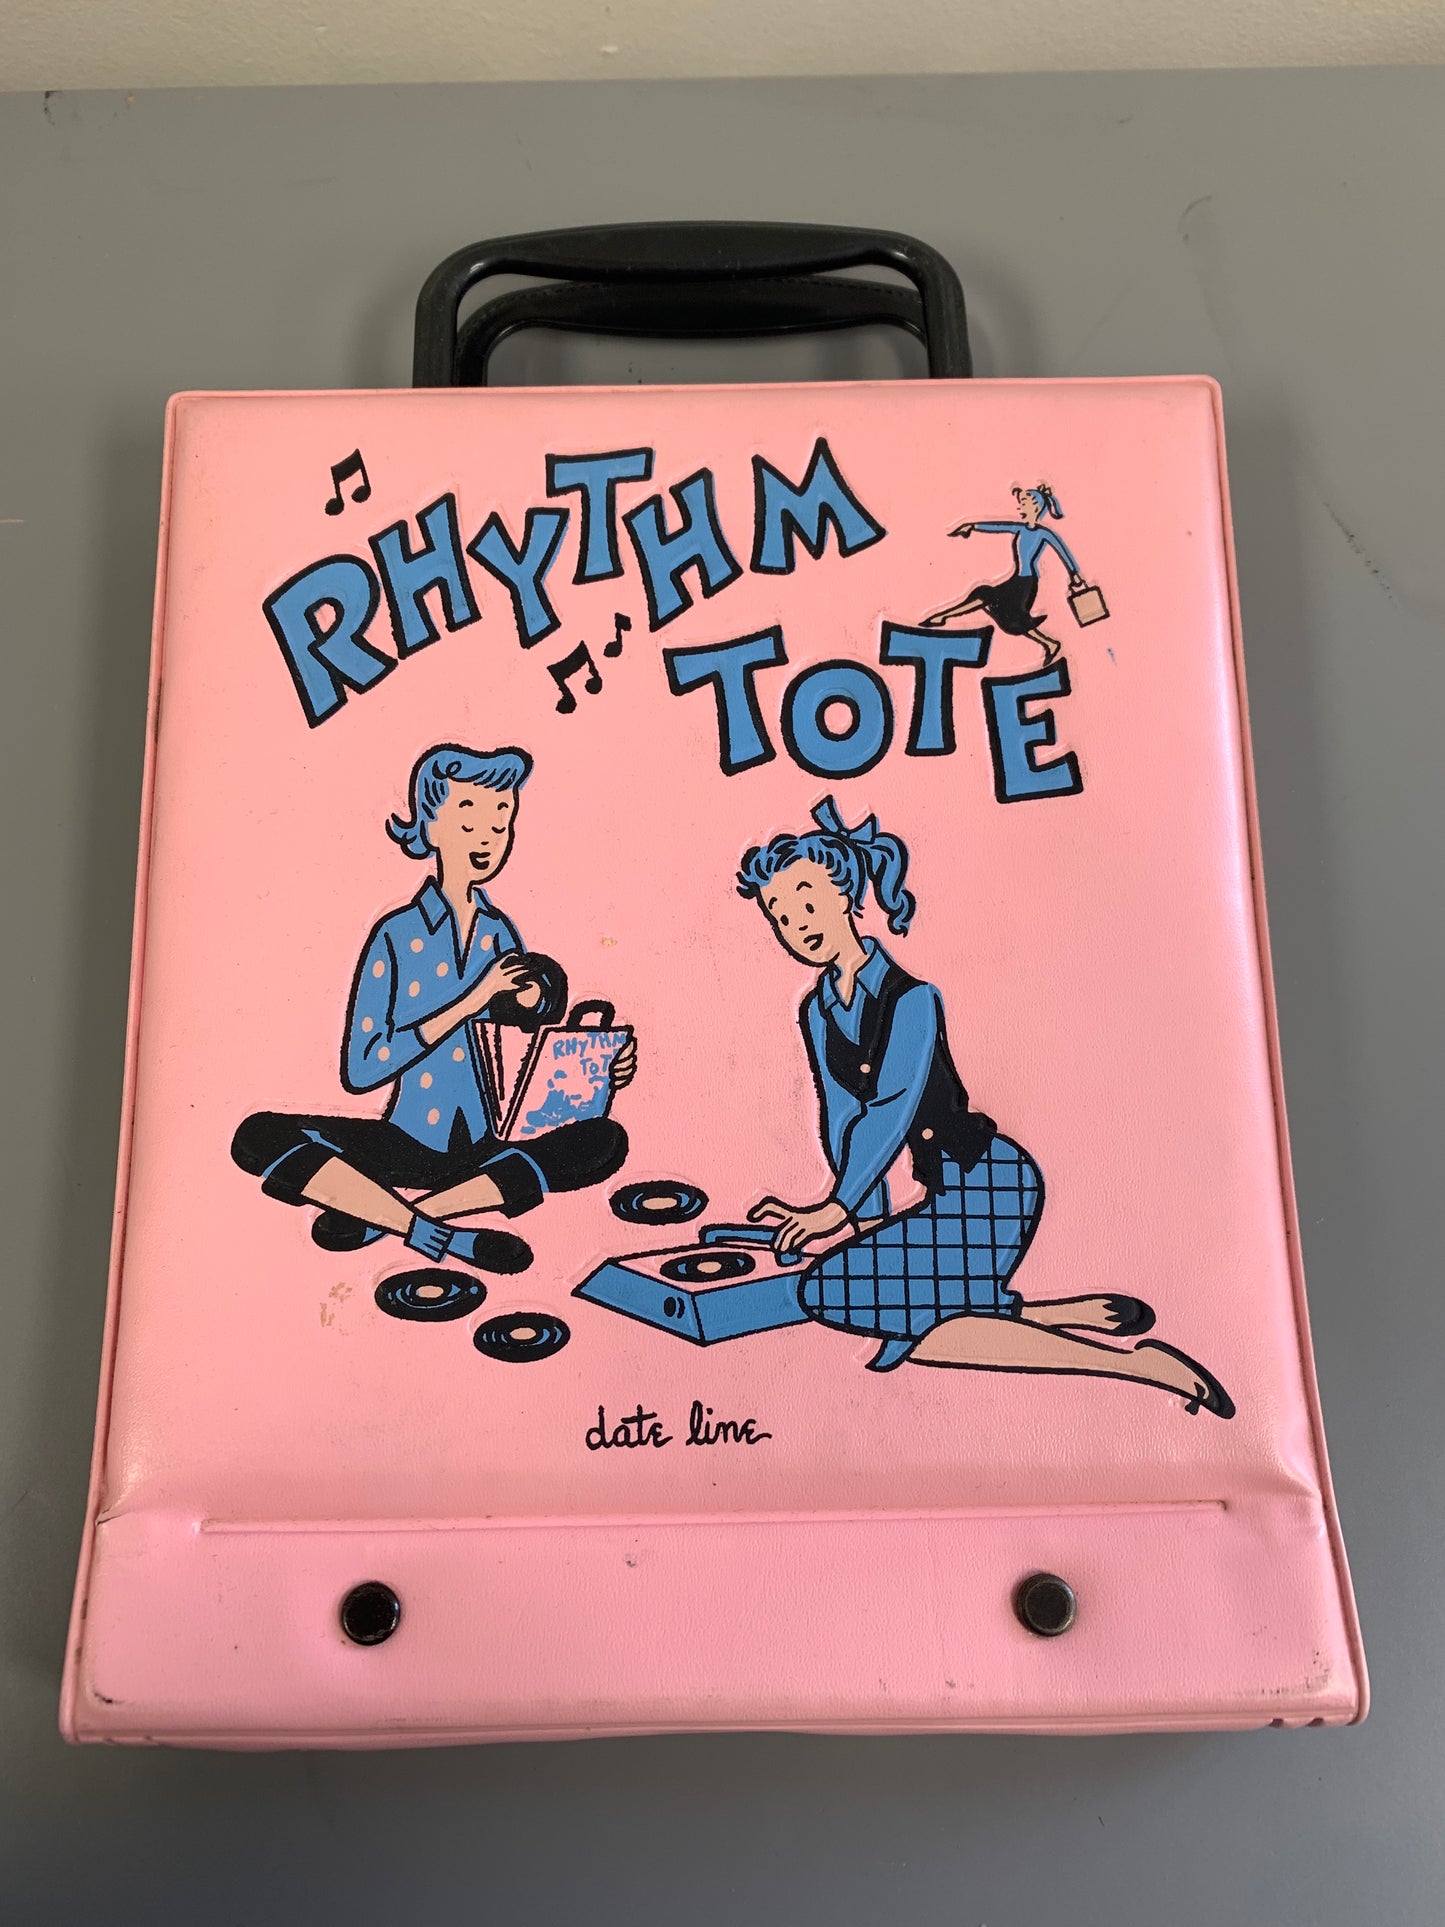 Vintage 1950's-60's Rhythm Tote Bag with 45 records